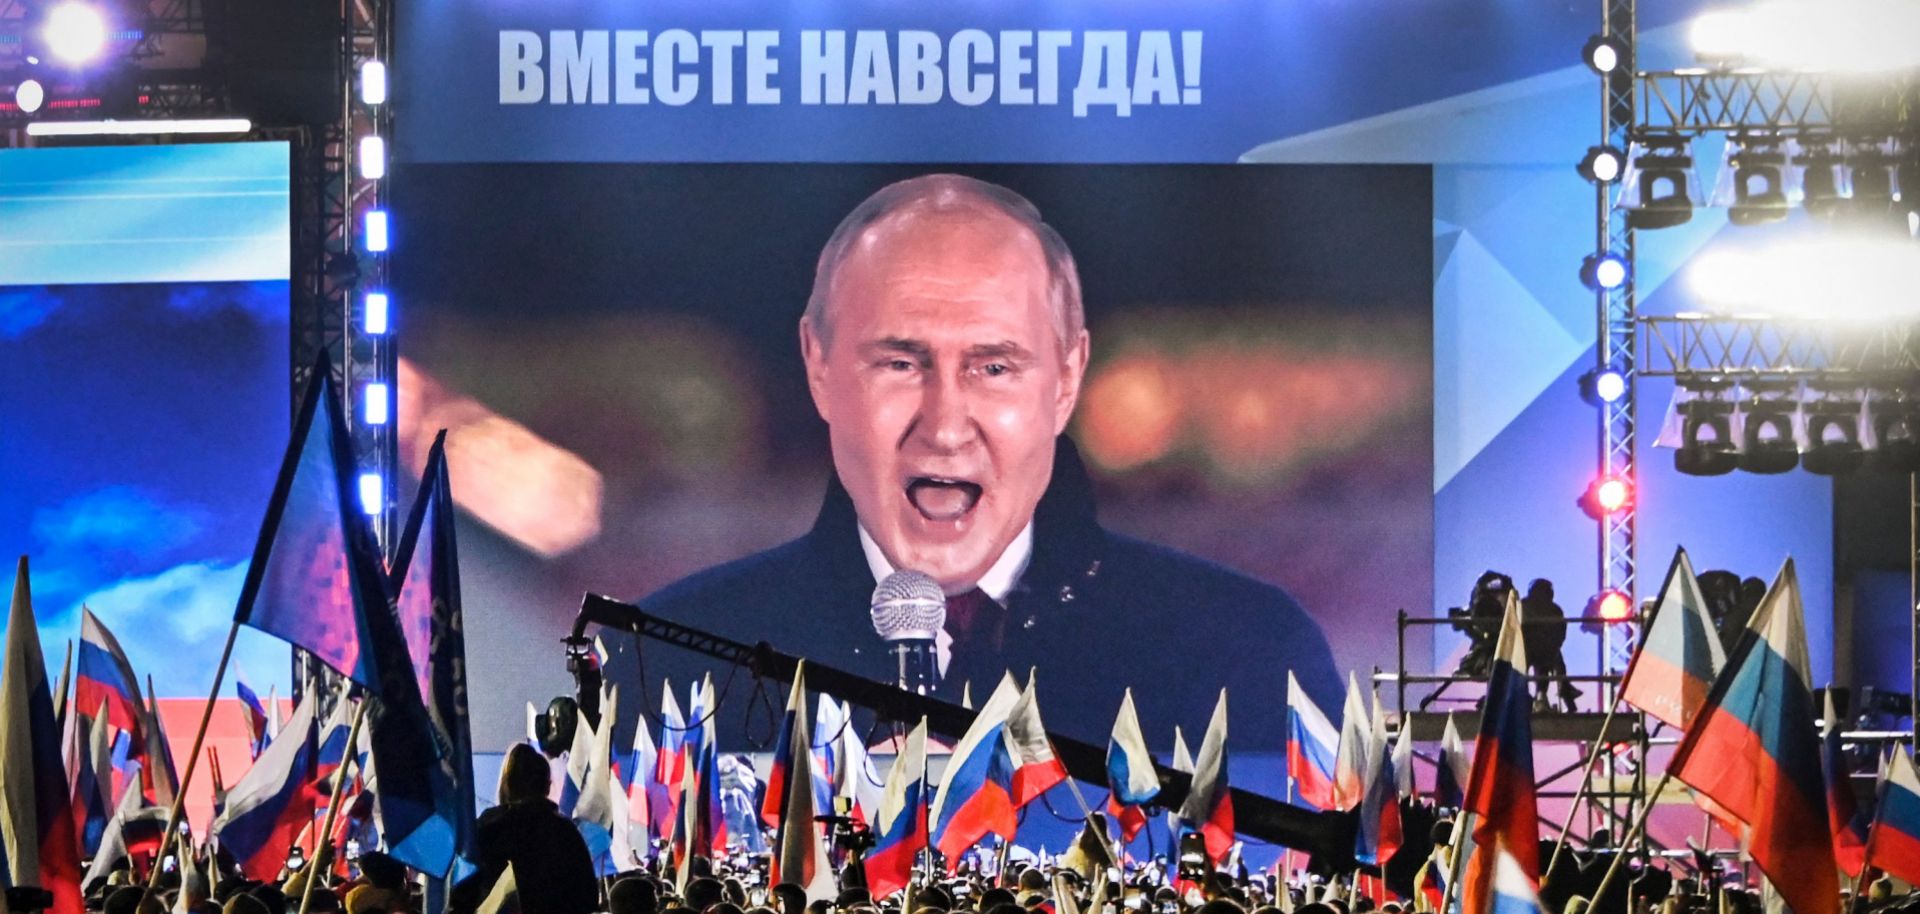 Russian President Vladimir Putin is seen on screen Sept. 30, 2022, at Red Square in Moscow addressing a rally and a concert regarding the annexation of four regions of Ukraine.